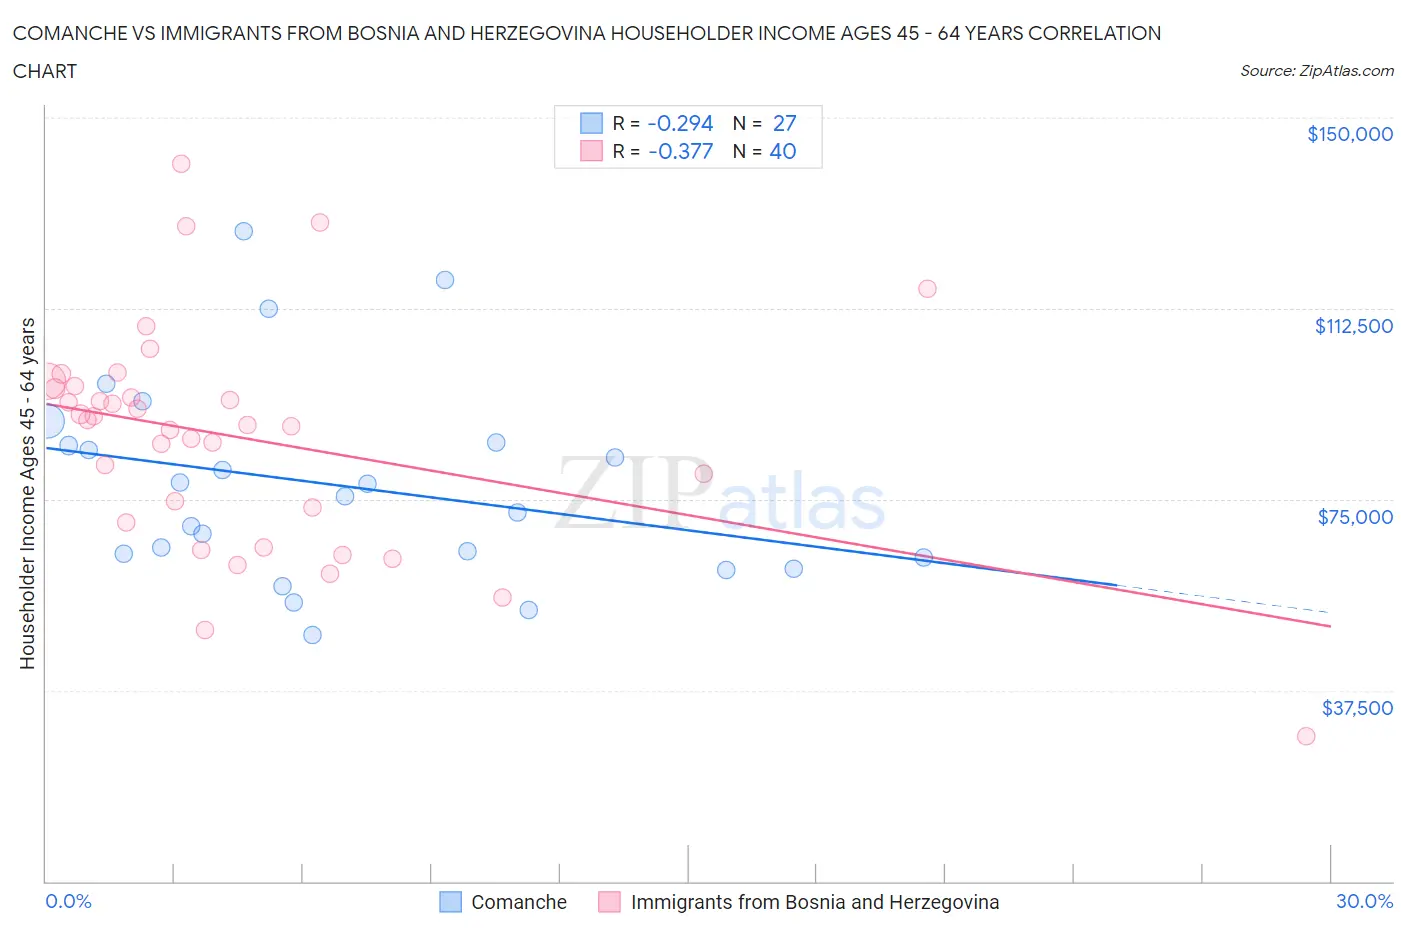 Comanche vs Immigrants from Bosnia and Herzegovina Householder Income Ages 45 - 64 years